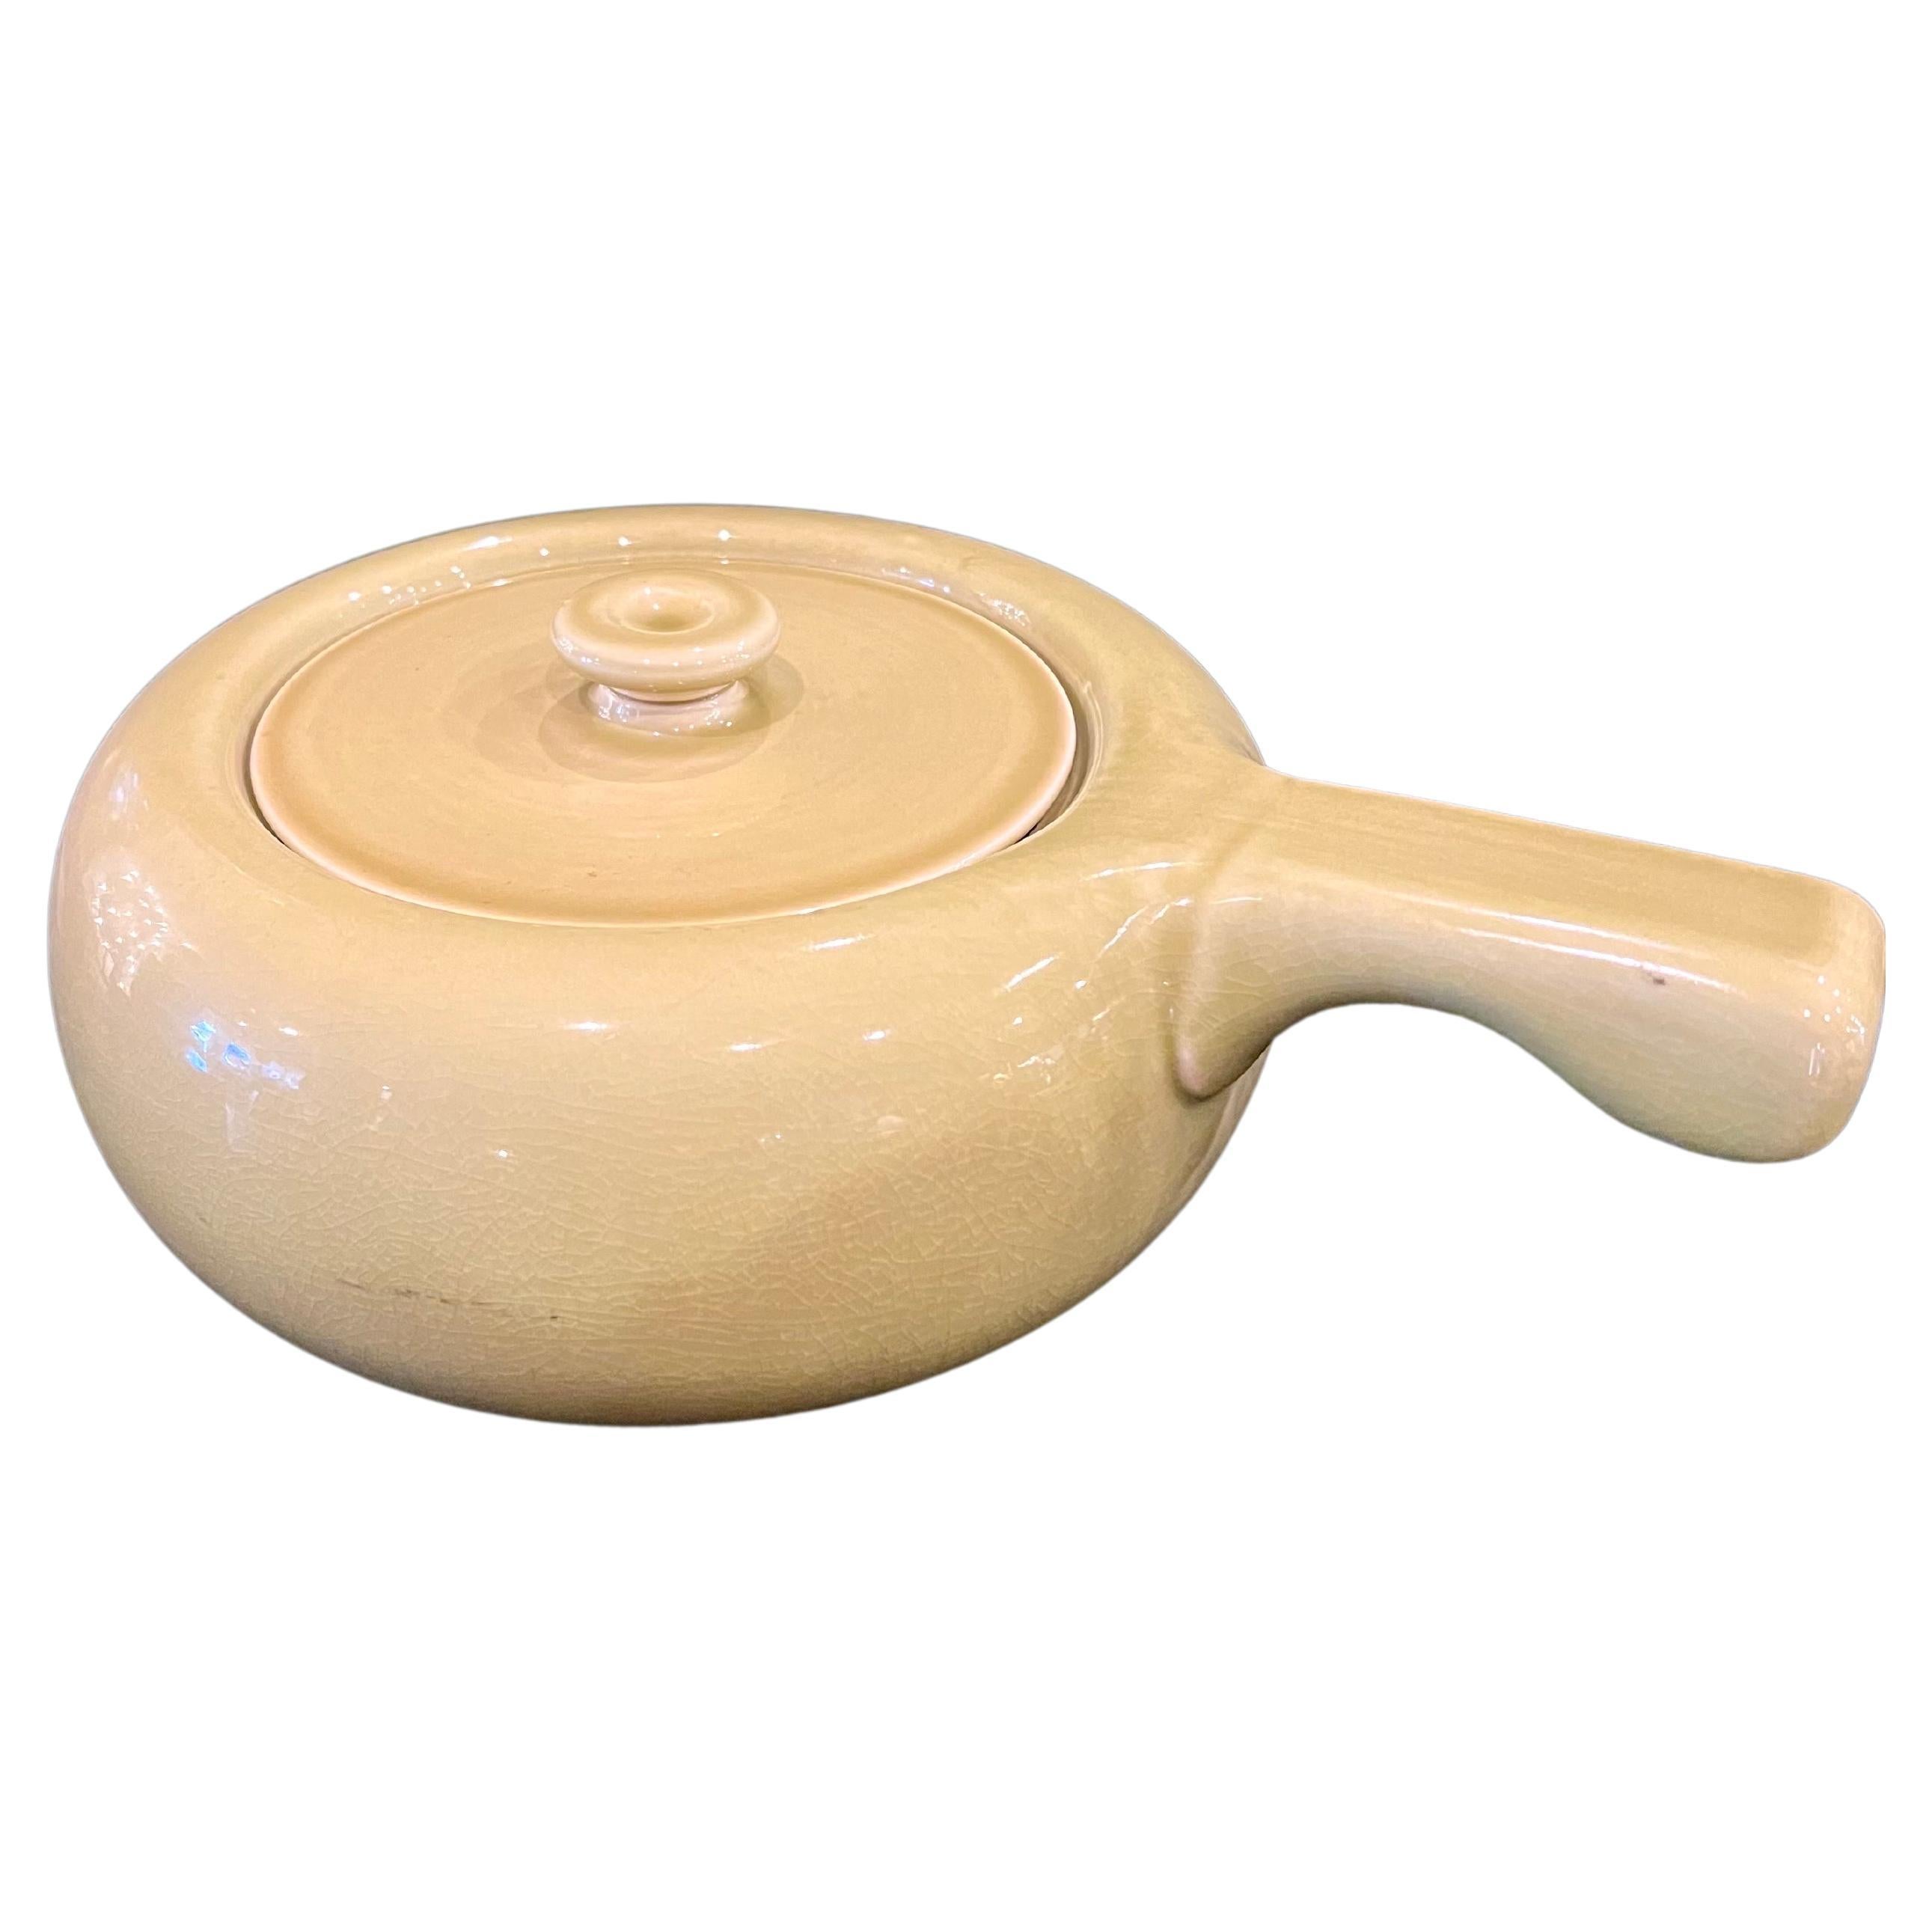 Stylish and functional American modern in chartreuse color handled casserole by Russel Wright for Steubenville pottery of Ohio, circa the 1940s. The ultramodern design emphasizes soft cures and simple glazing. The piece is in excellent vintage